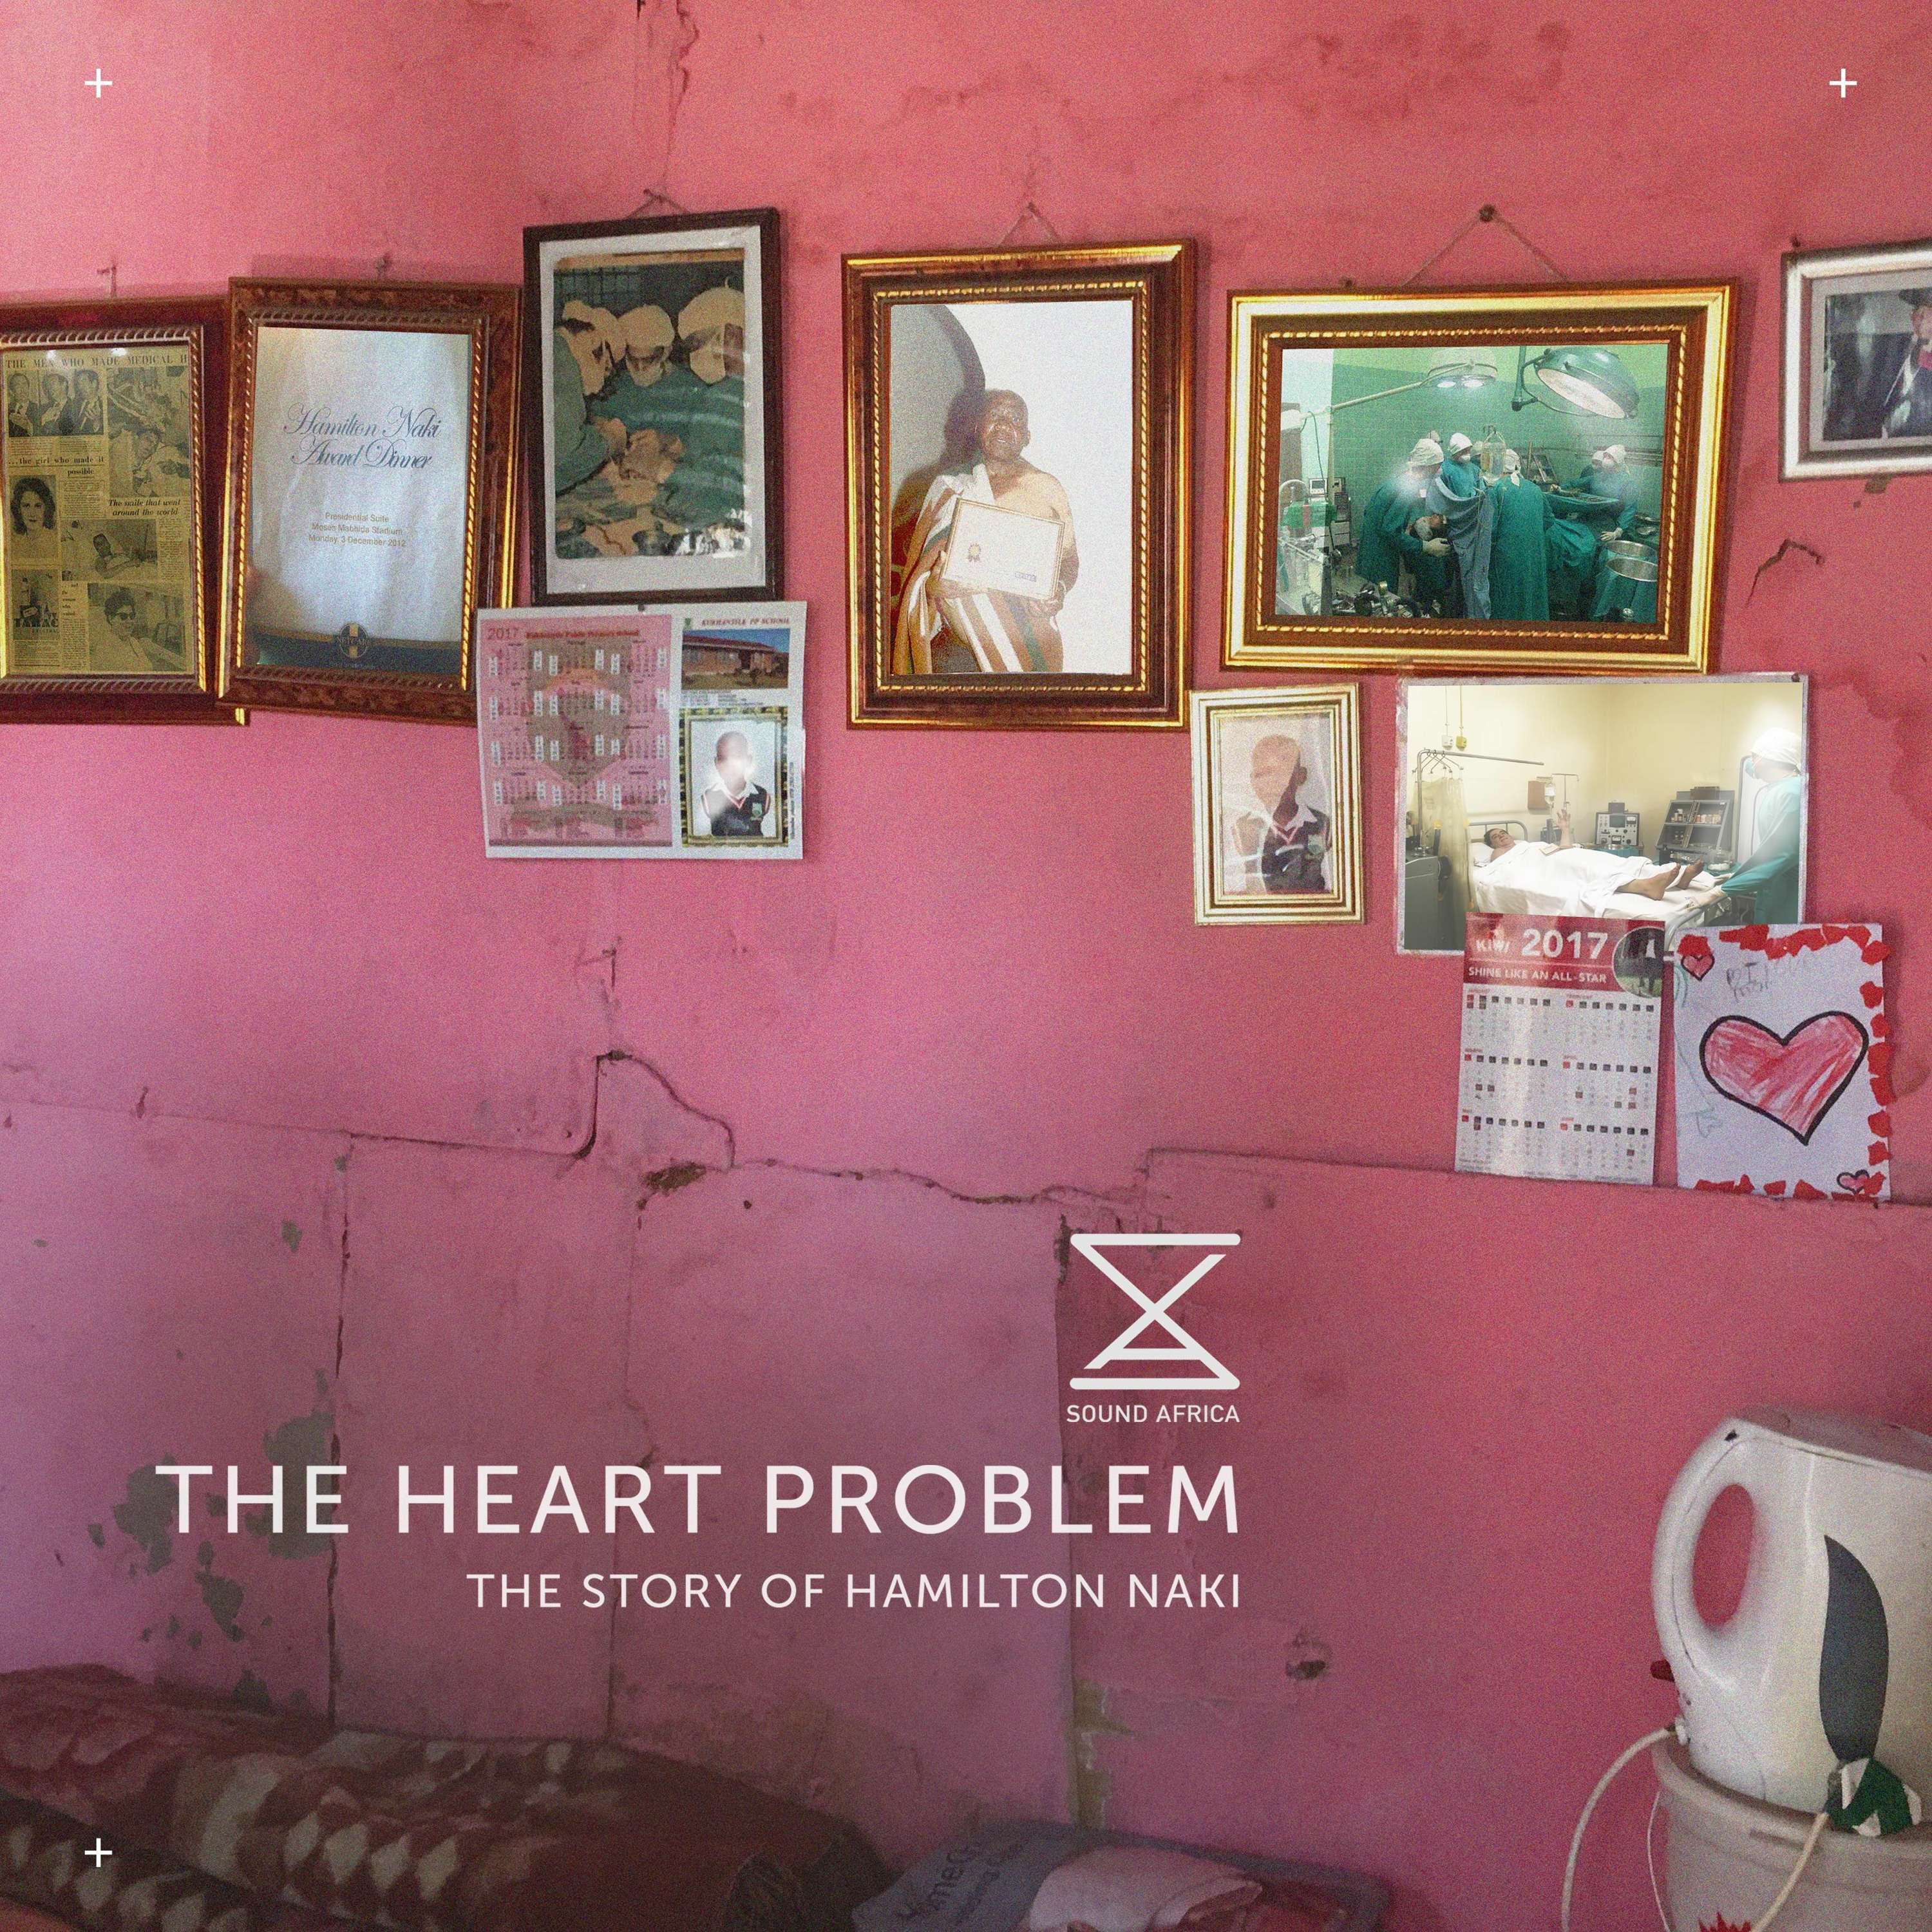 The Heart Problem